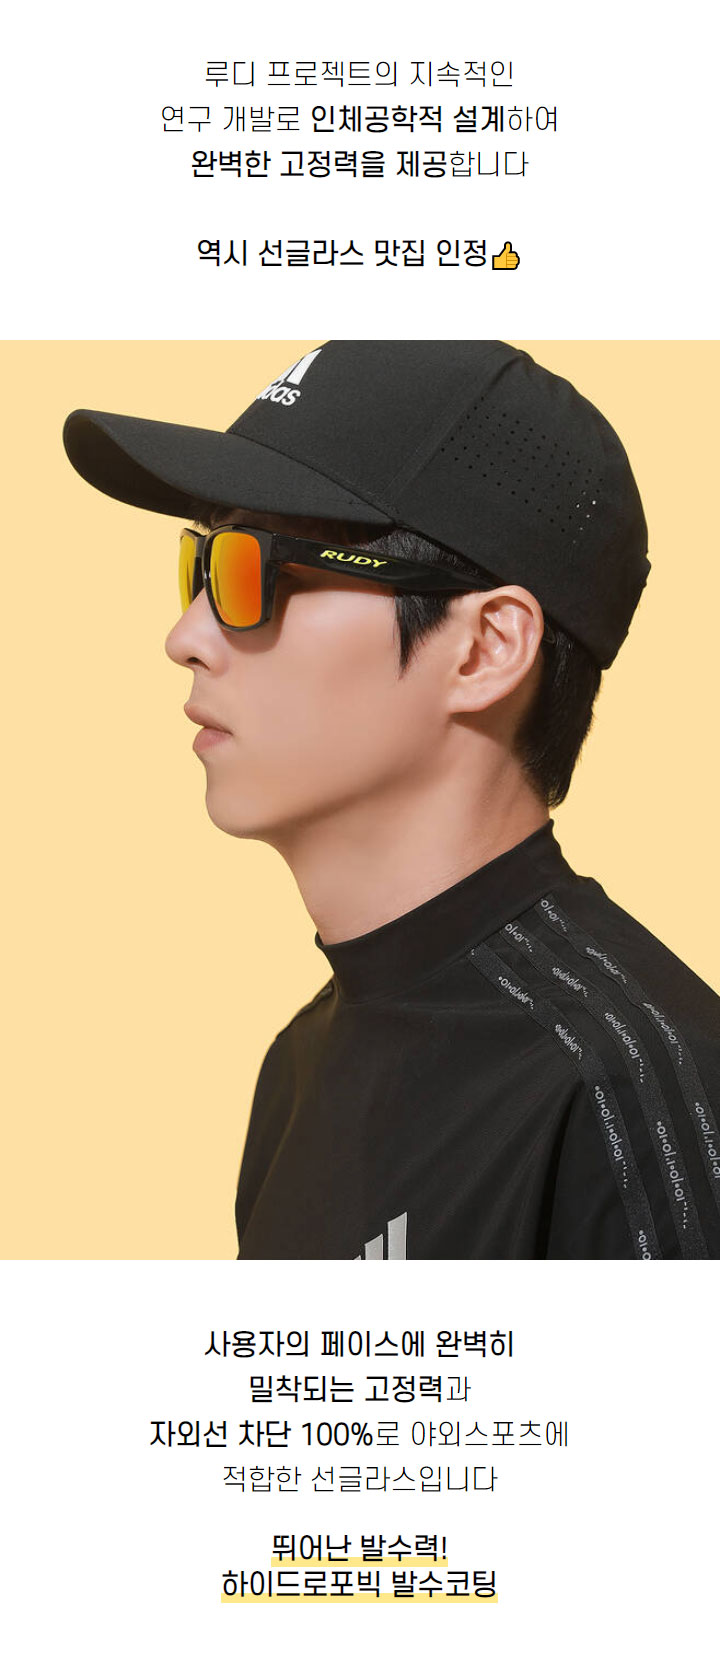 rudyproject_special_edition_sunglasses_22_11.jpg